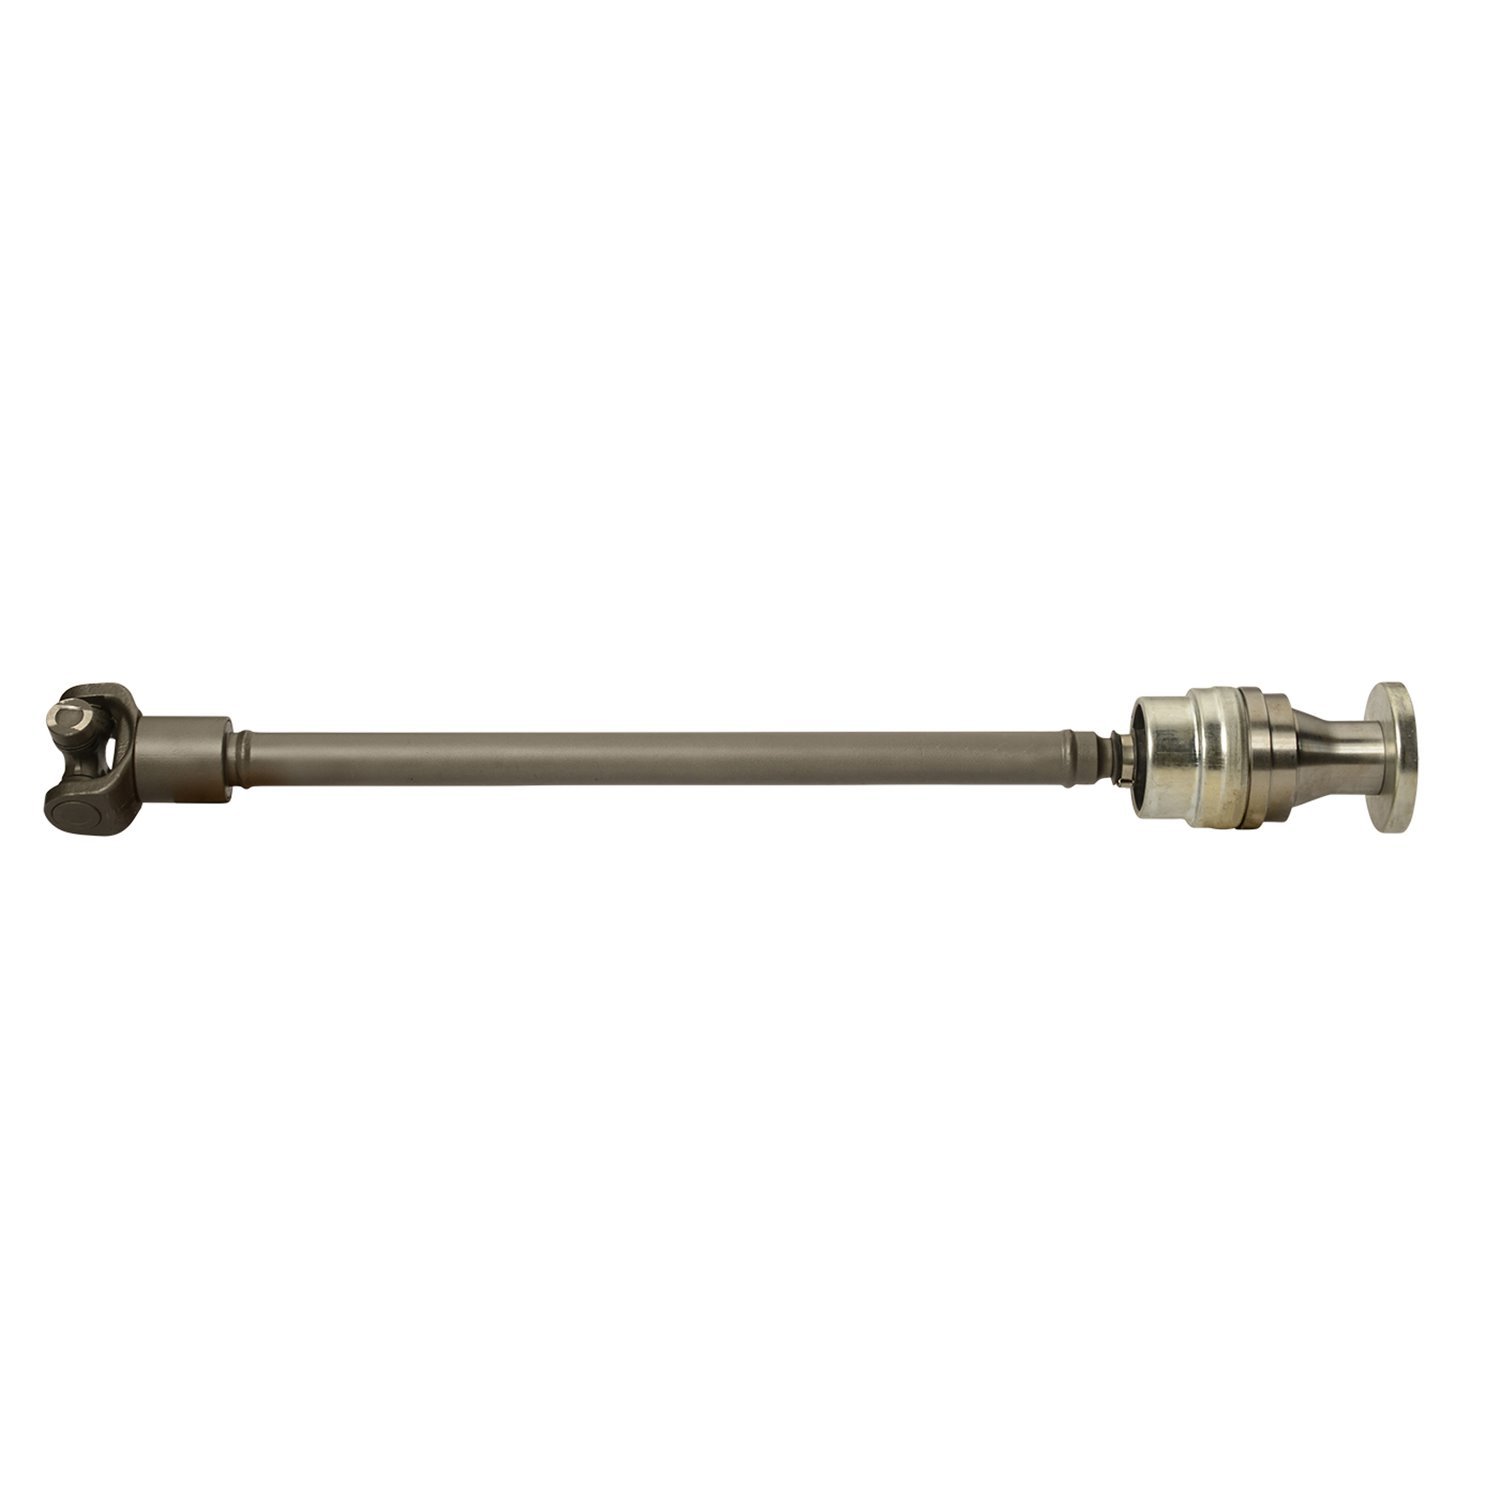 USA Standard ZDS9146 Front Driveshaft, For GM Astro & Safari Van, 26 in. Weld-To-Weld